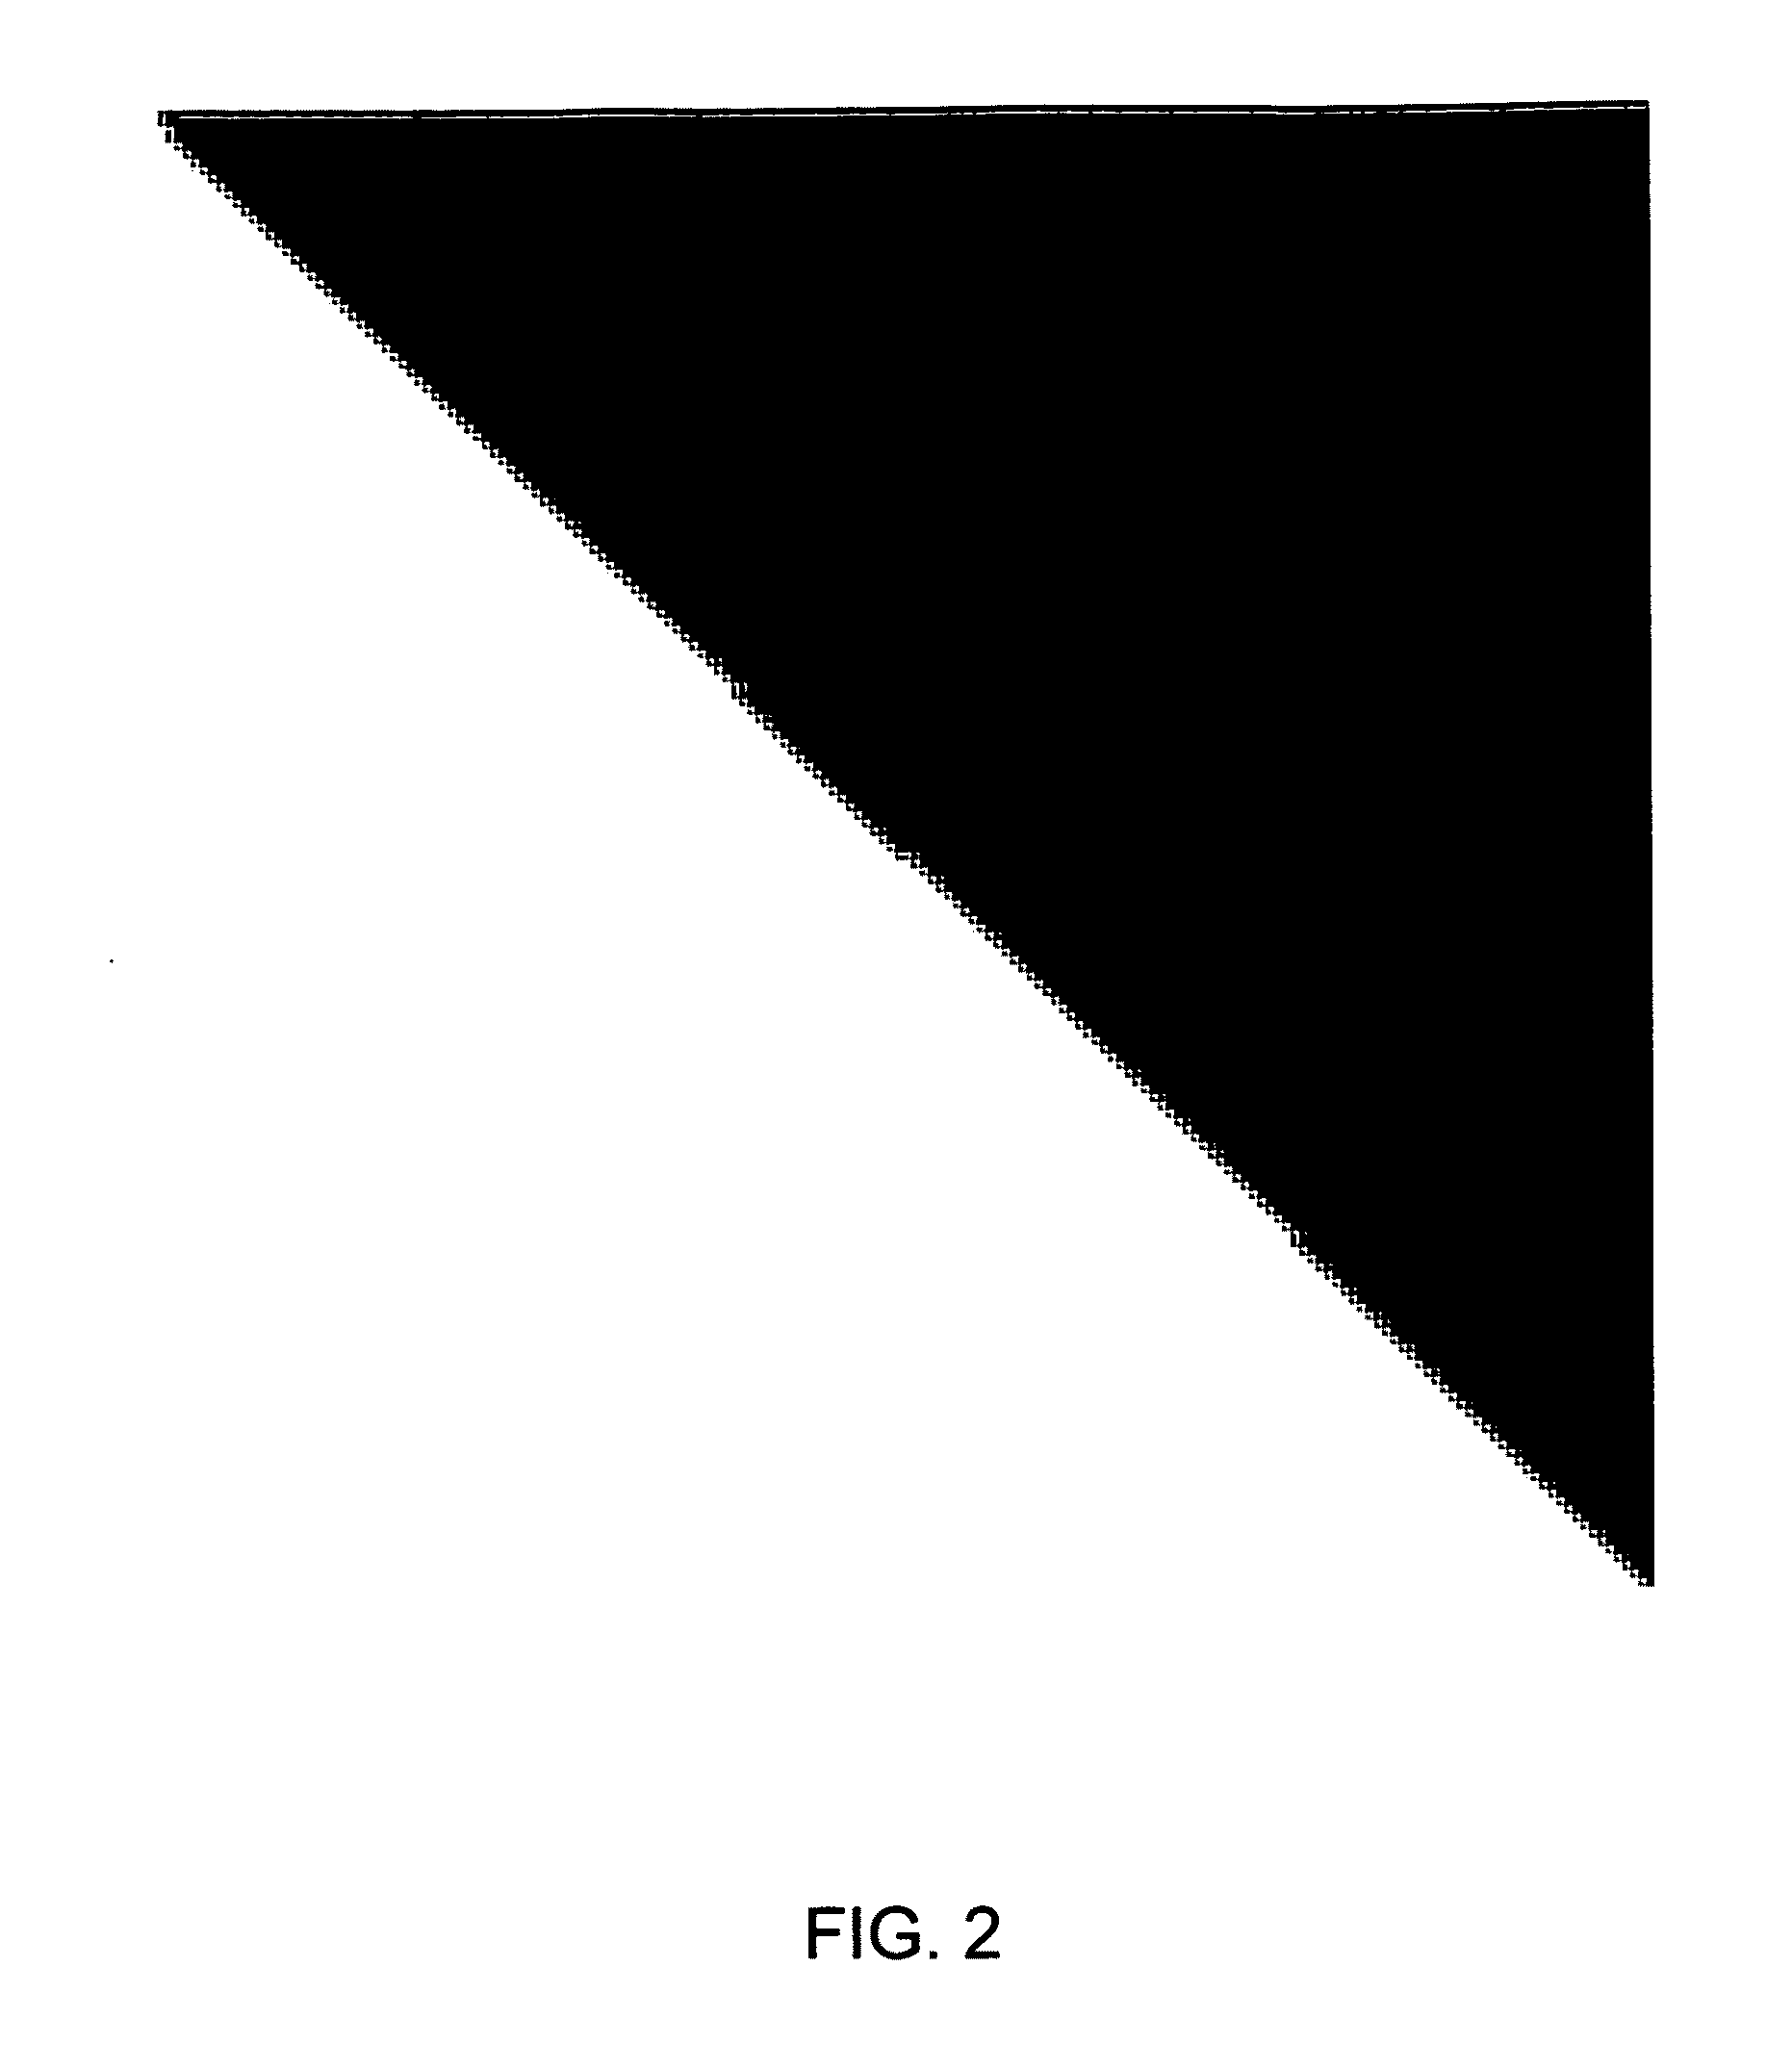 Systems and methods for manifold learning for matting